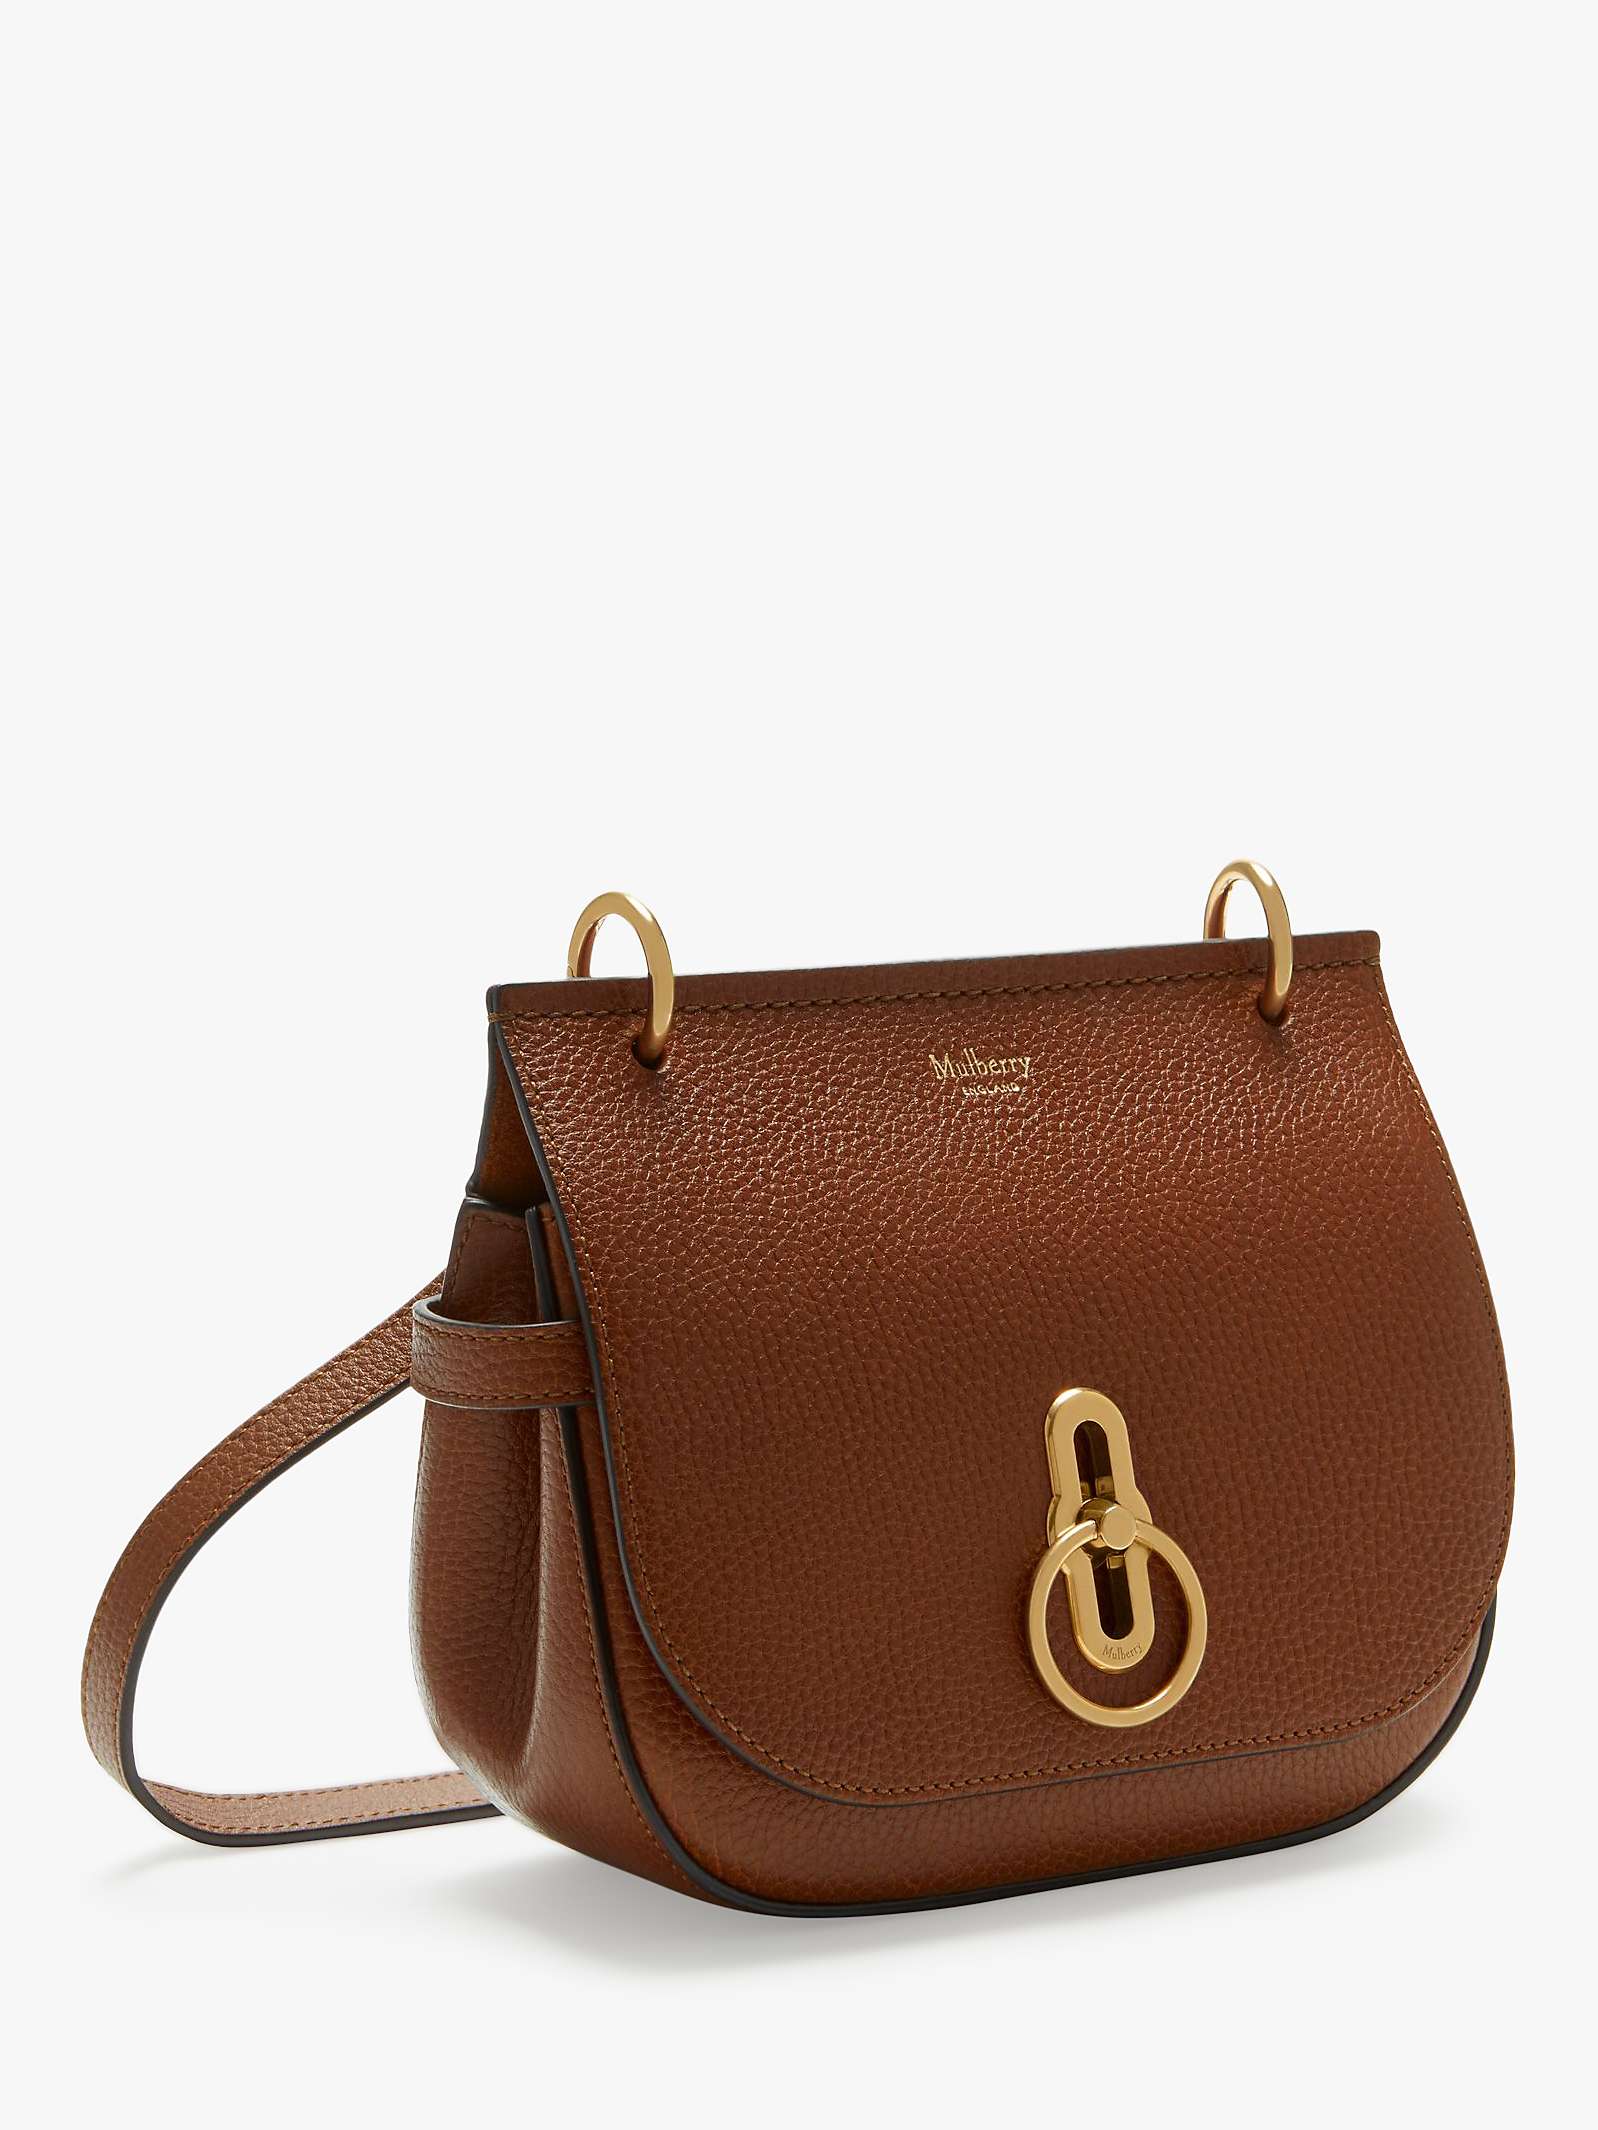 Buy Mulberry Small Amberley Grain Veg Tanned Leather Satchel Bag Online at johnlewis.com